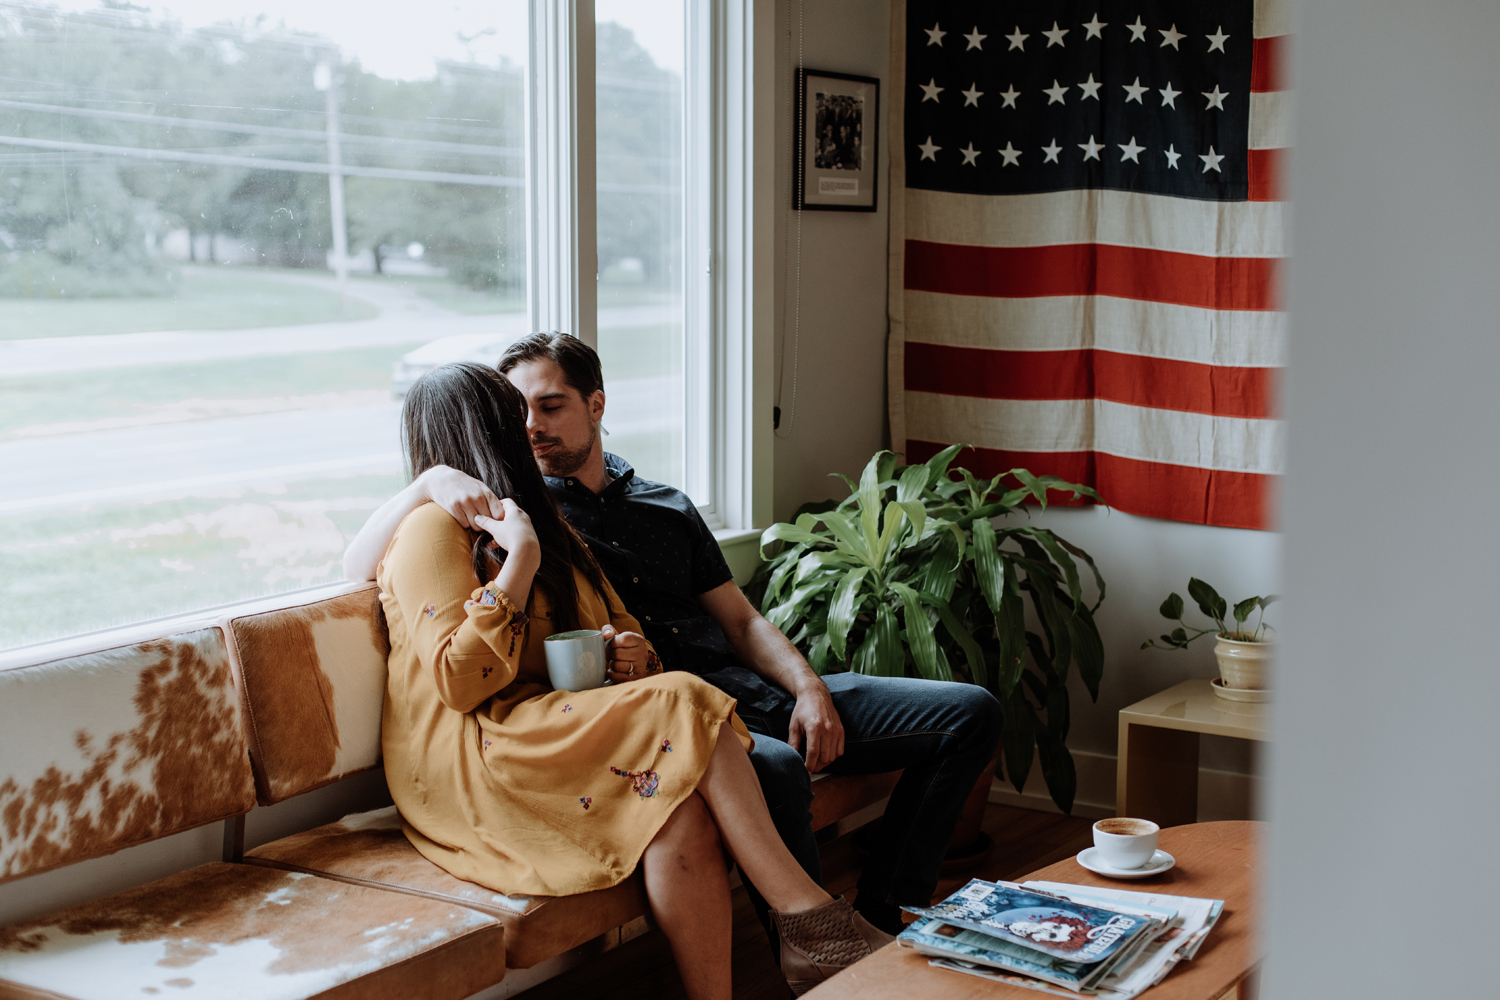 Casually dressed couple embracing each other, staring intently into one another's eyes, while sitting on a vintage brown and white-colored couch overlooked by a red, white, and blue United States of America flag hanging on the wall to the far right side of the photo.